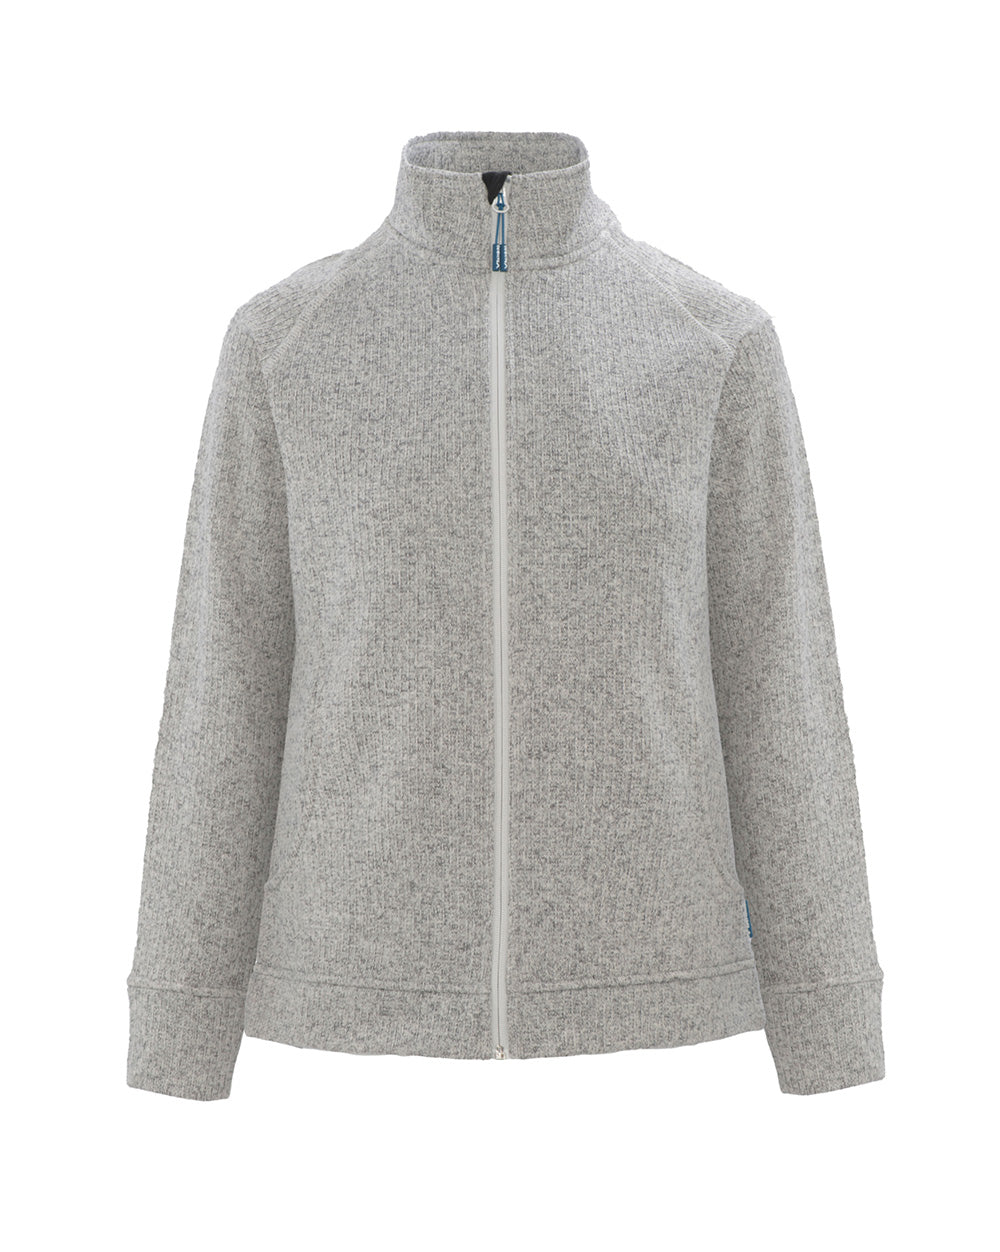 Imai Recycled Knit Jacket in Pebble Marle